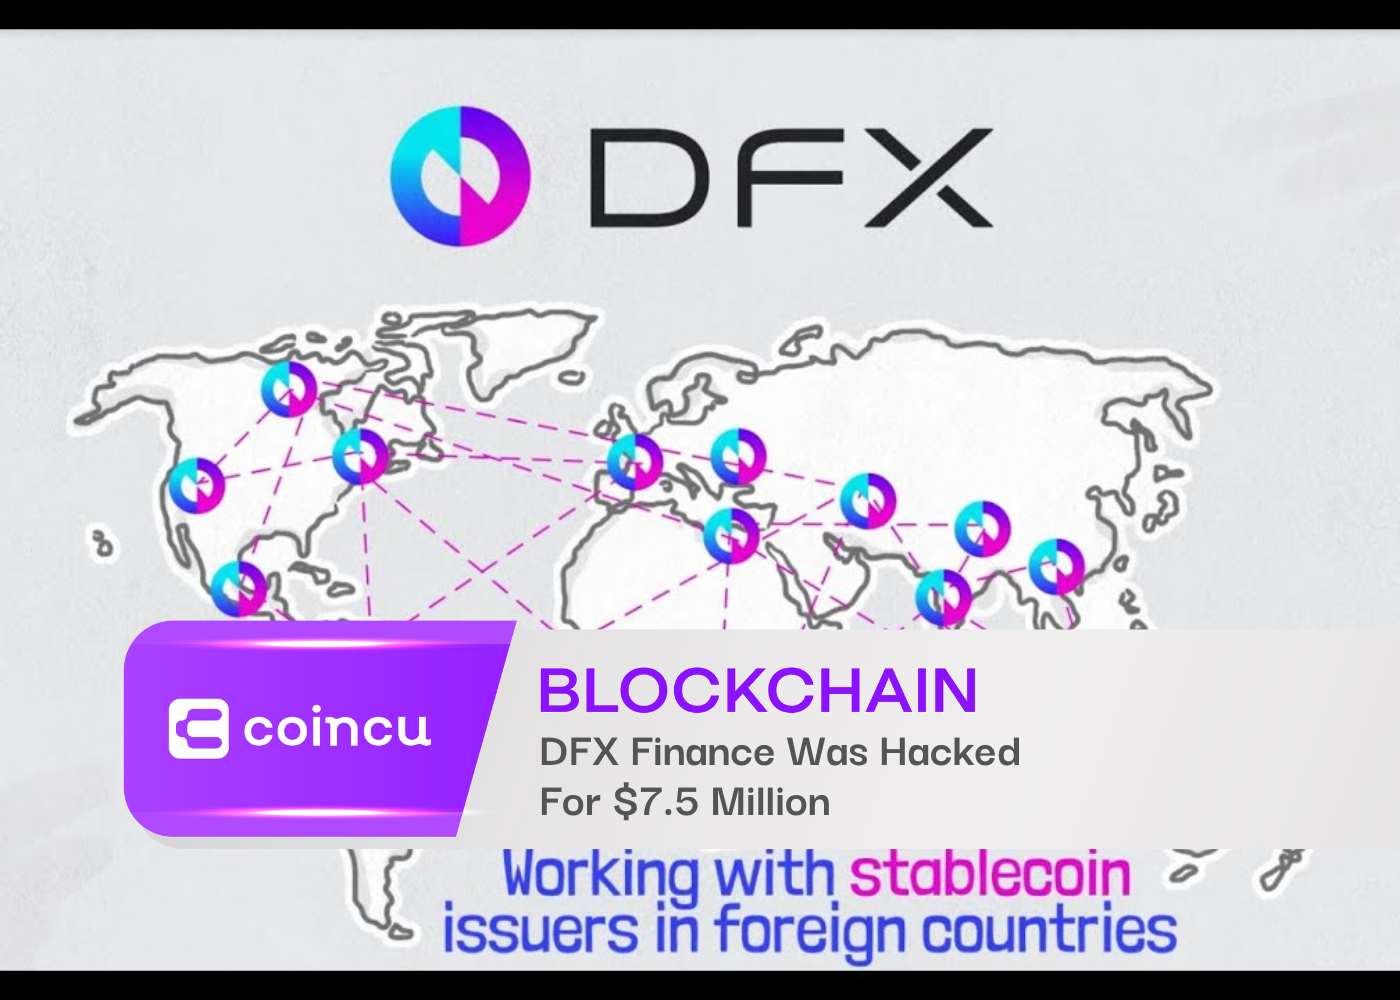 DFX Finance Was Hacked